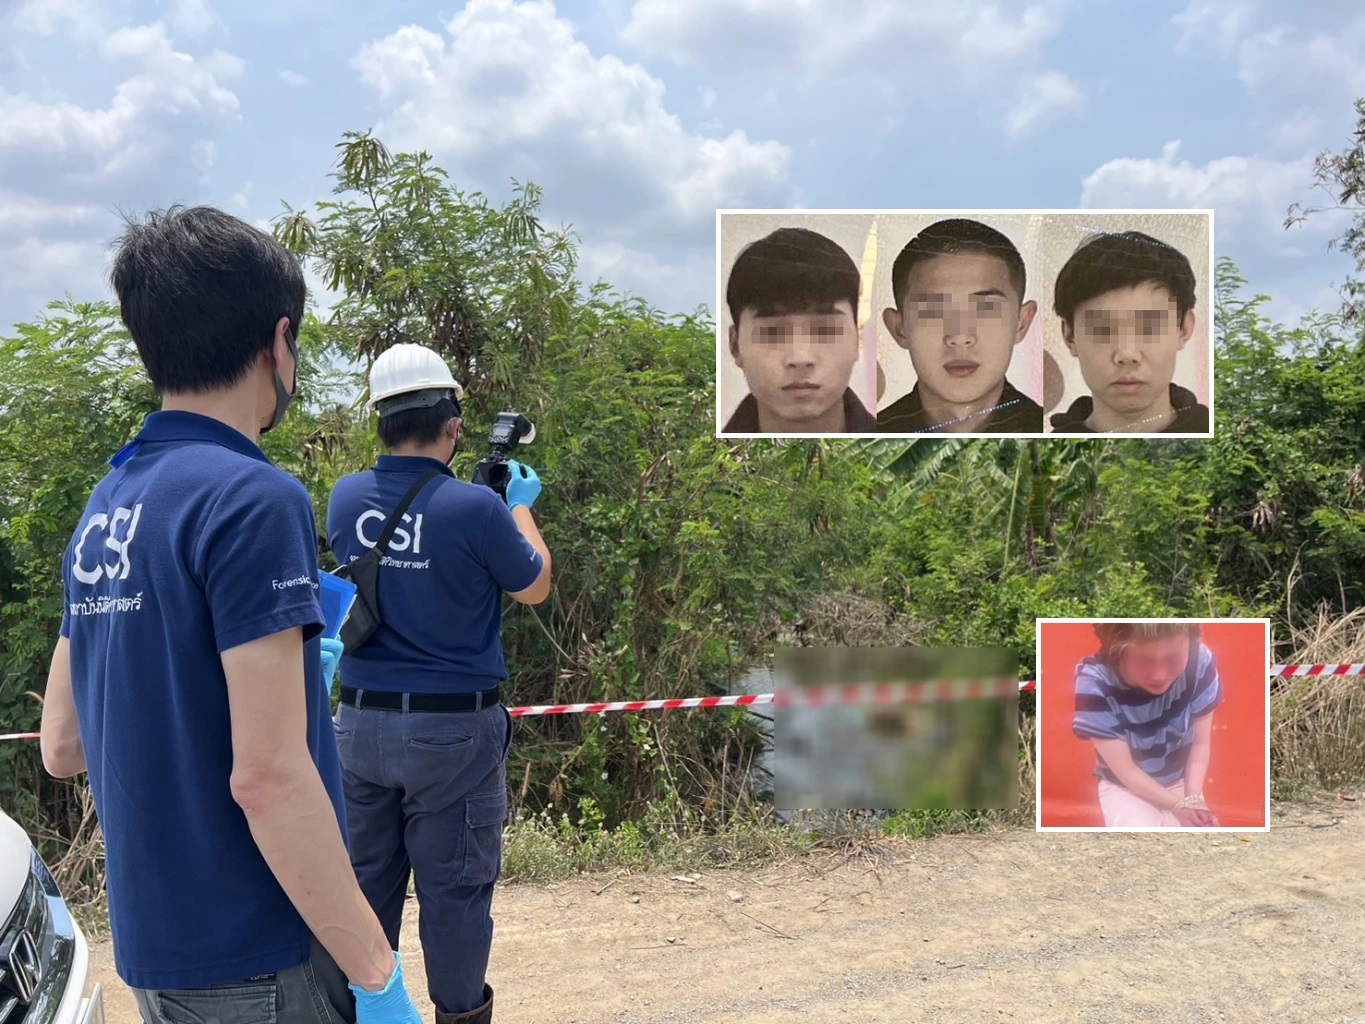 3 Chinese Murder Suspects Wanted in Thailand Apprehended in Wuhan, China